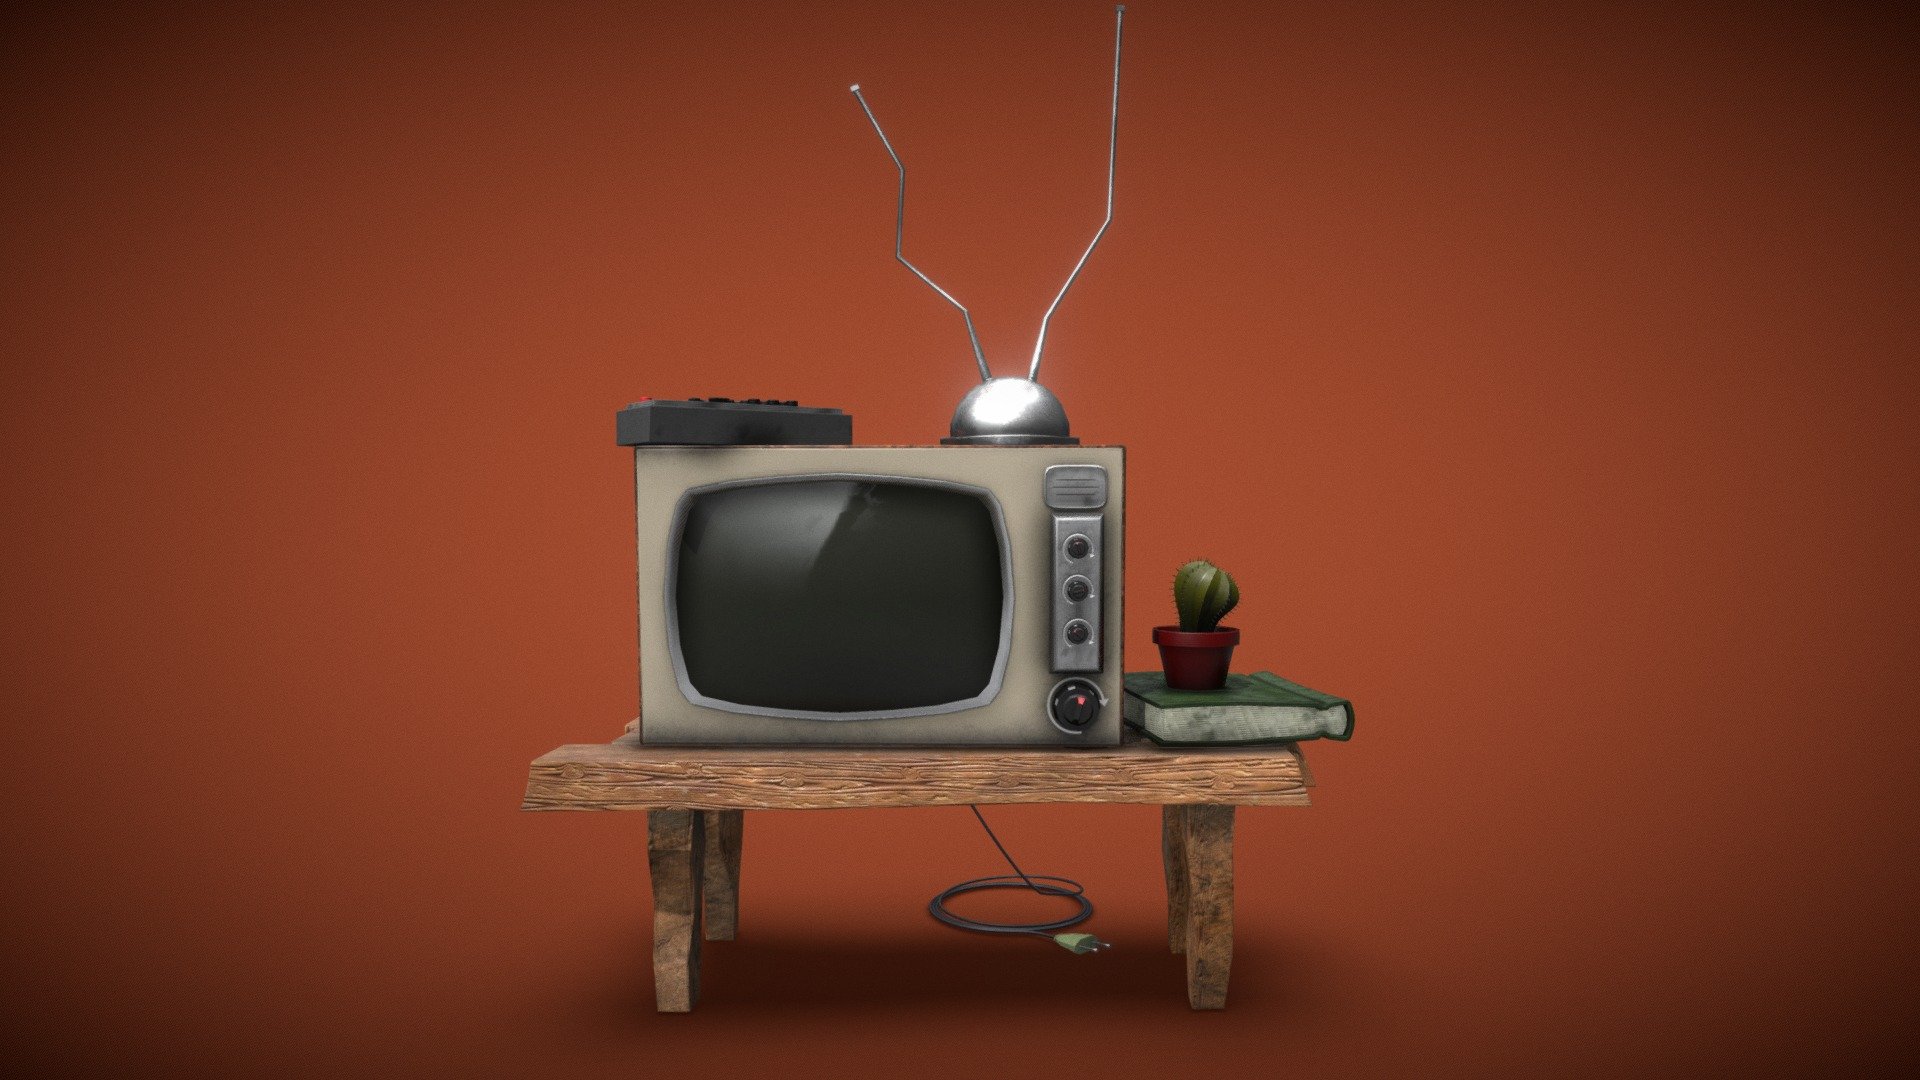 Stylized telly 3d model low polygonal.

The archive includes - 4k maps, fbx, .max, .sps and renders - Cartoon Retro Telly Low Polygonal - 3D model by Armen Gevorgyan (@armeniouz) 3d model